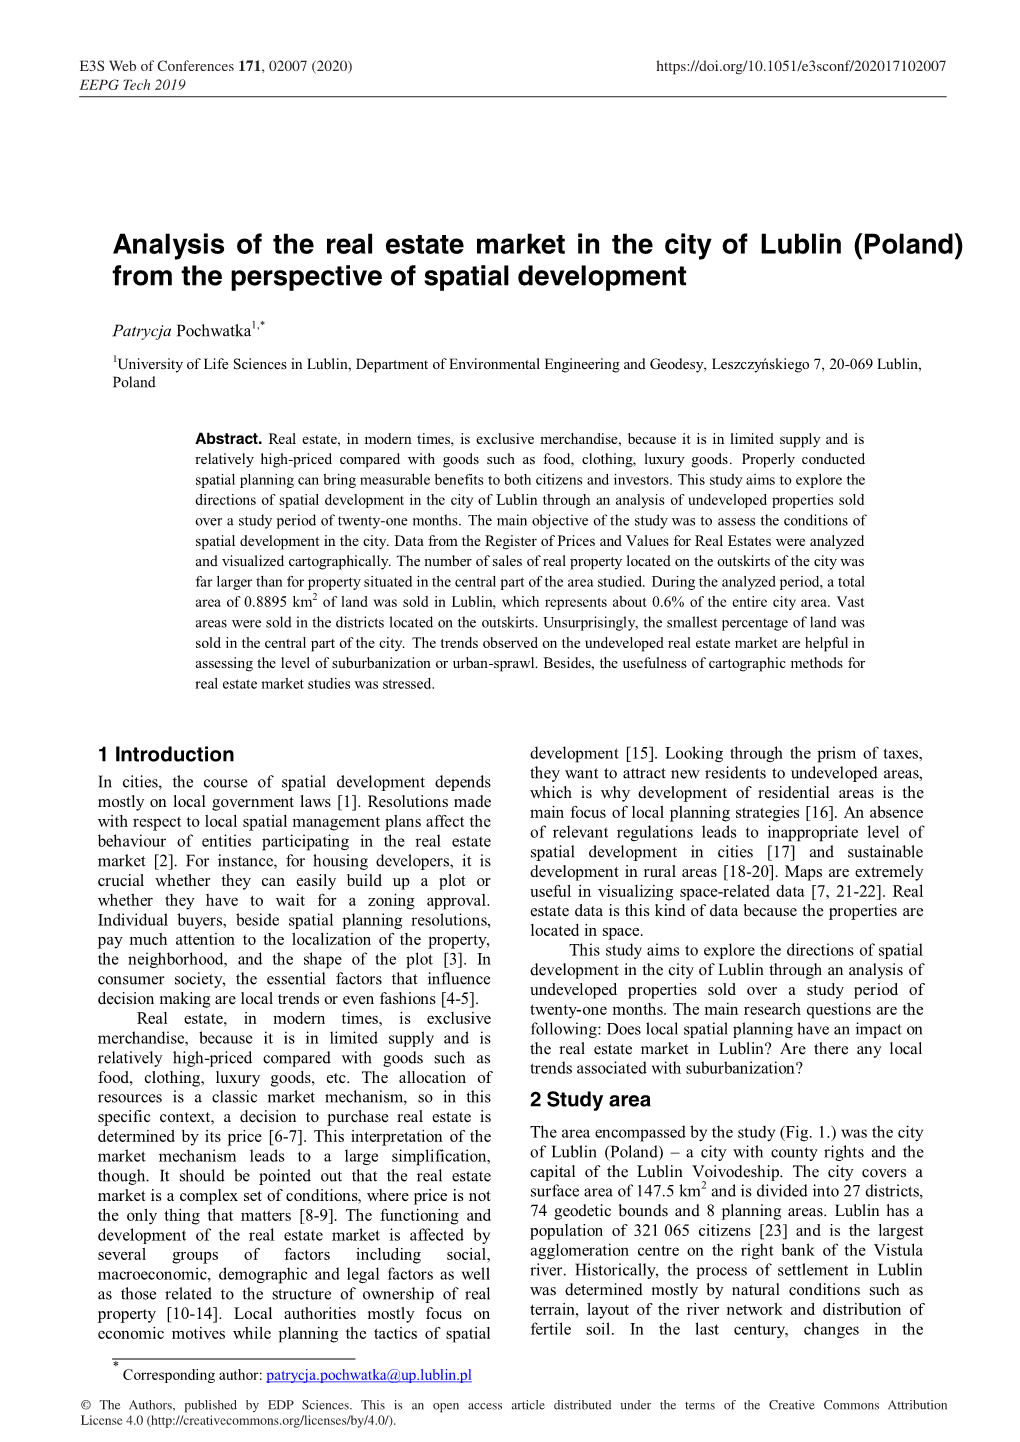 Analysis of the Real Estate Market in the City of Lublin (Poland) from the Perspective of Spatial Development